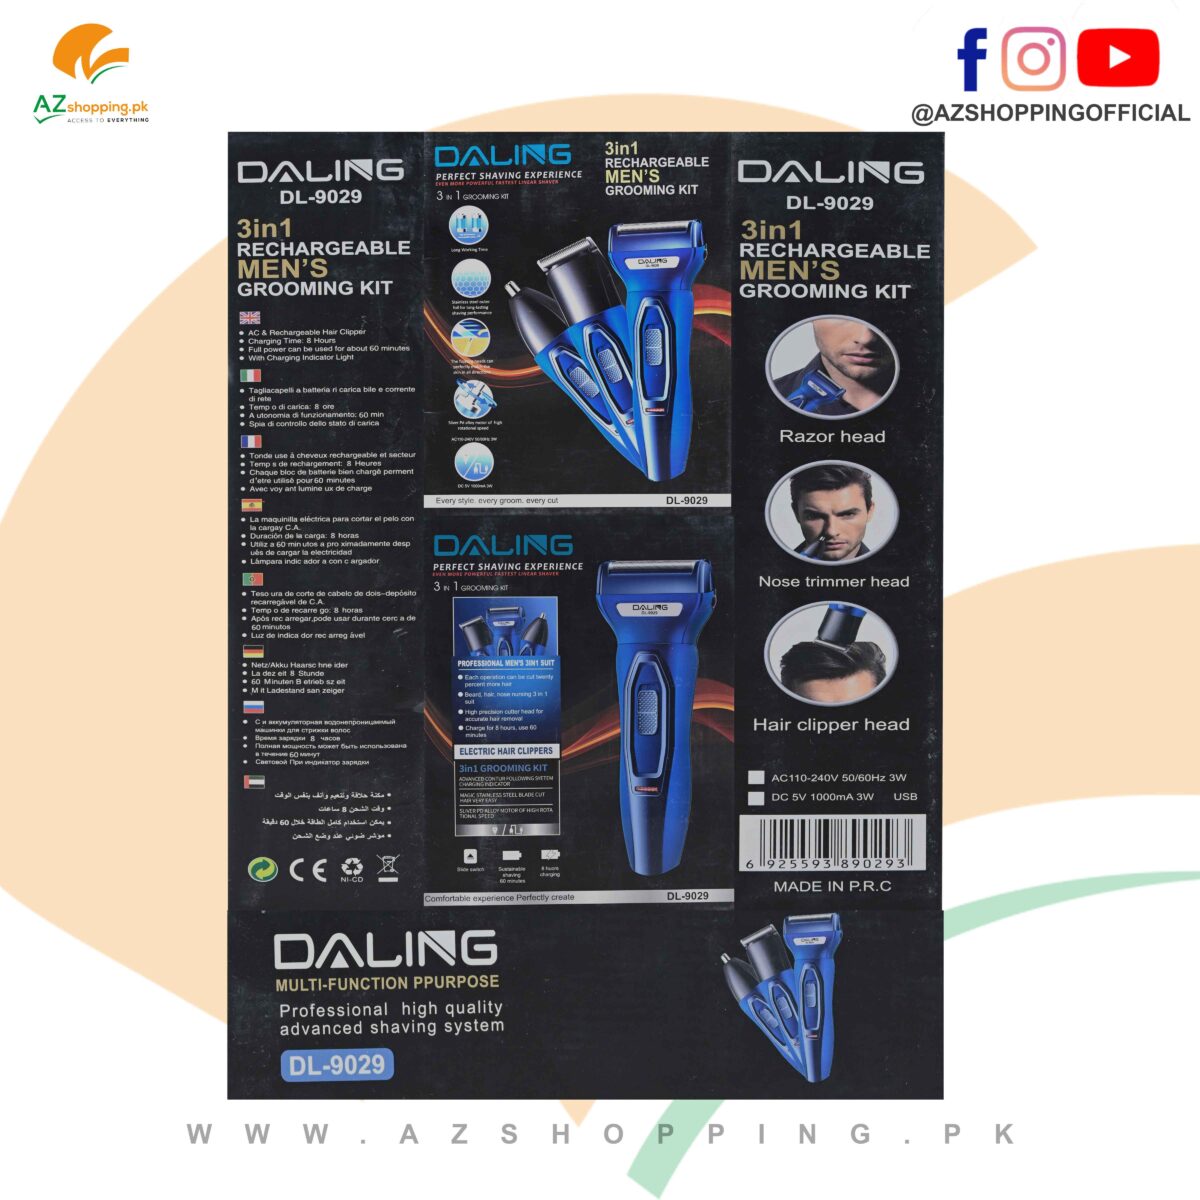 DALING 3 in 1 Rechargeable Electric Men's Grooming Kit (Shave, Nose & Hair Trimmer) – Model DL-9029